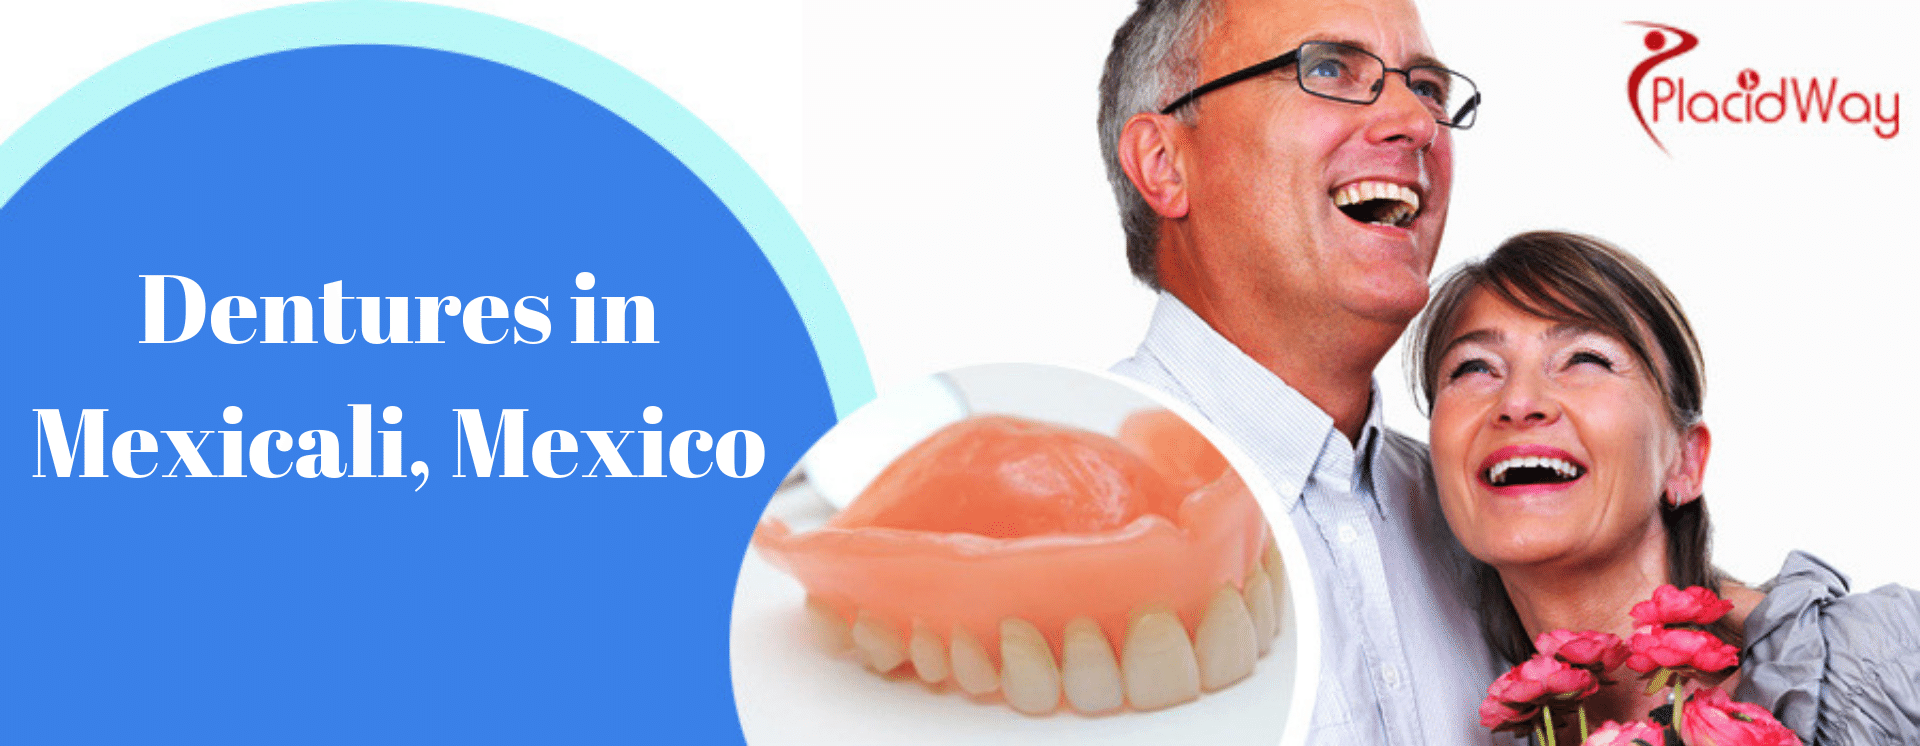 1568120528 Dentures in Mexicali